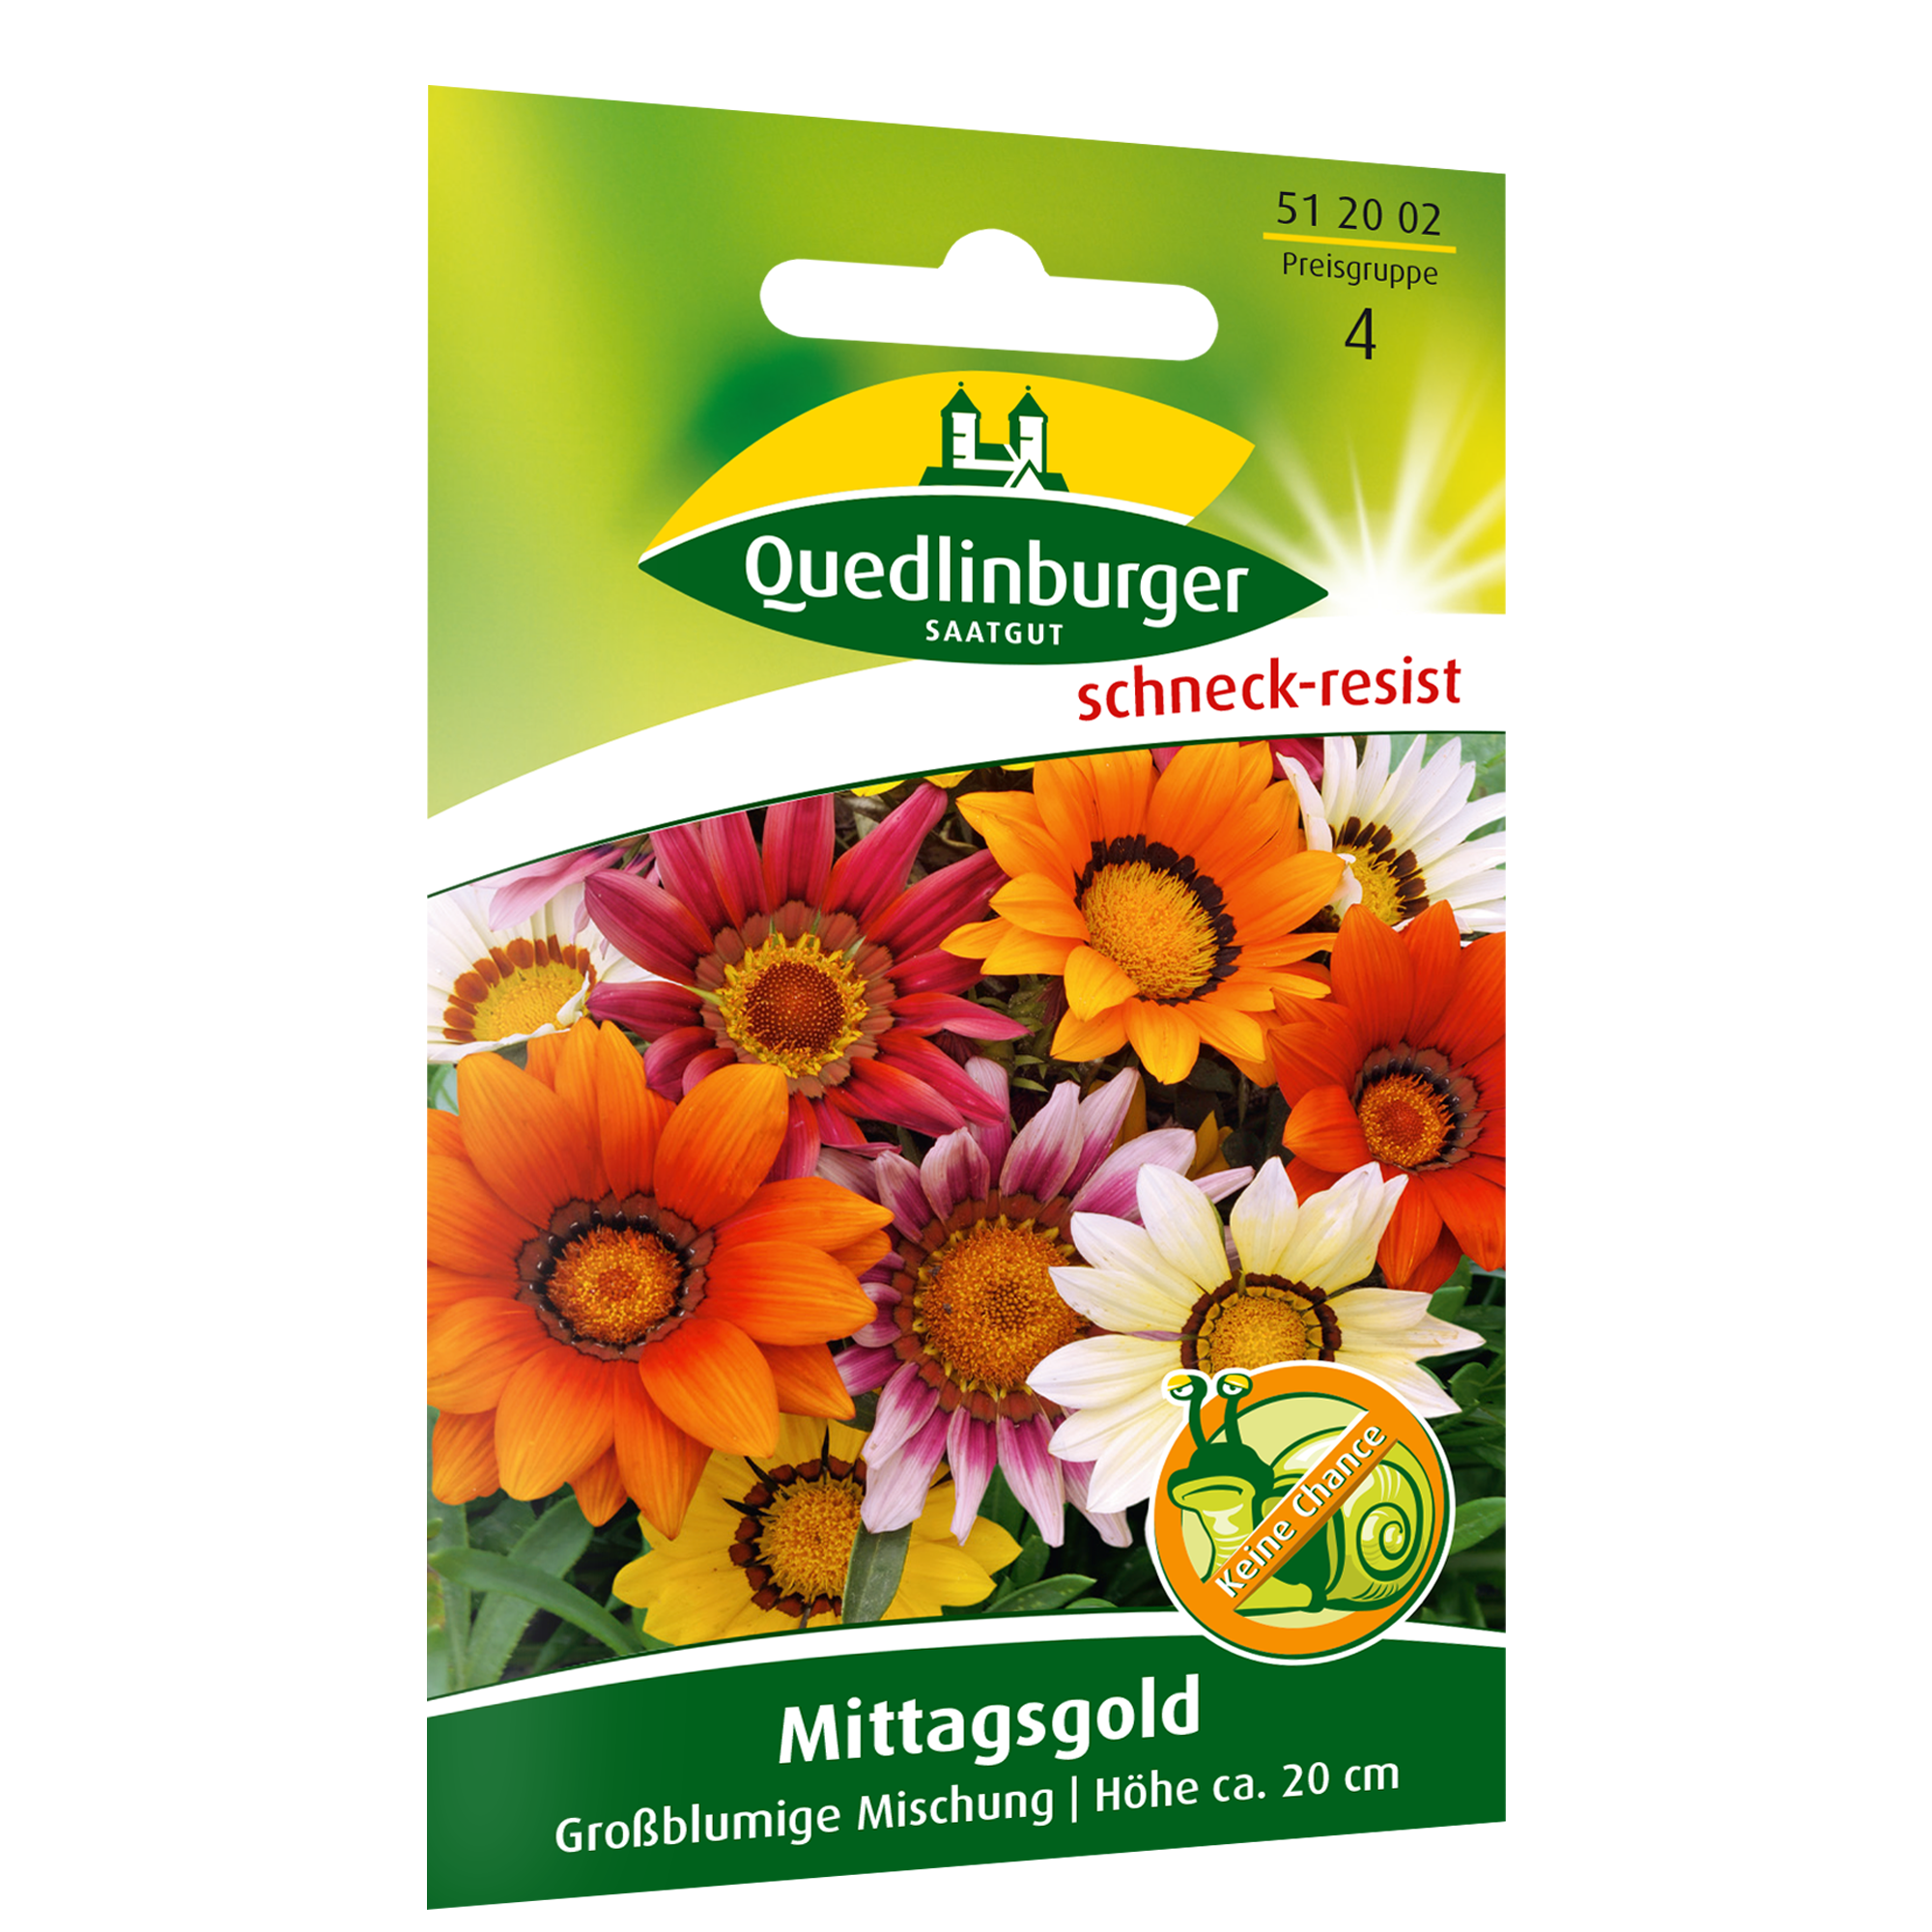 Mittagsgold großblumig, Mischung + product picture